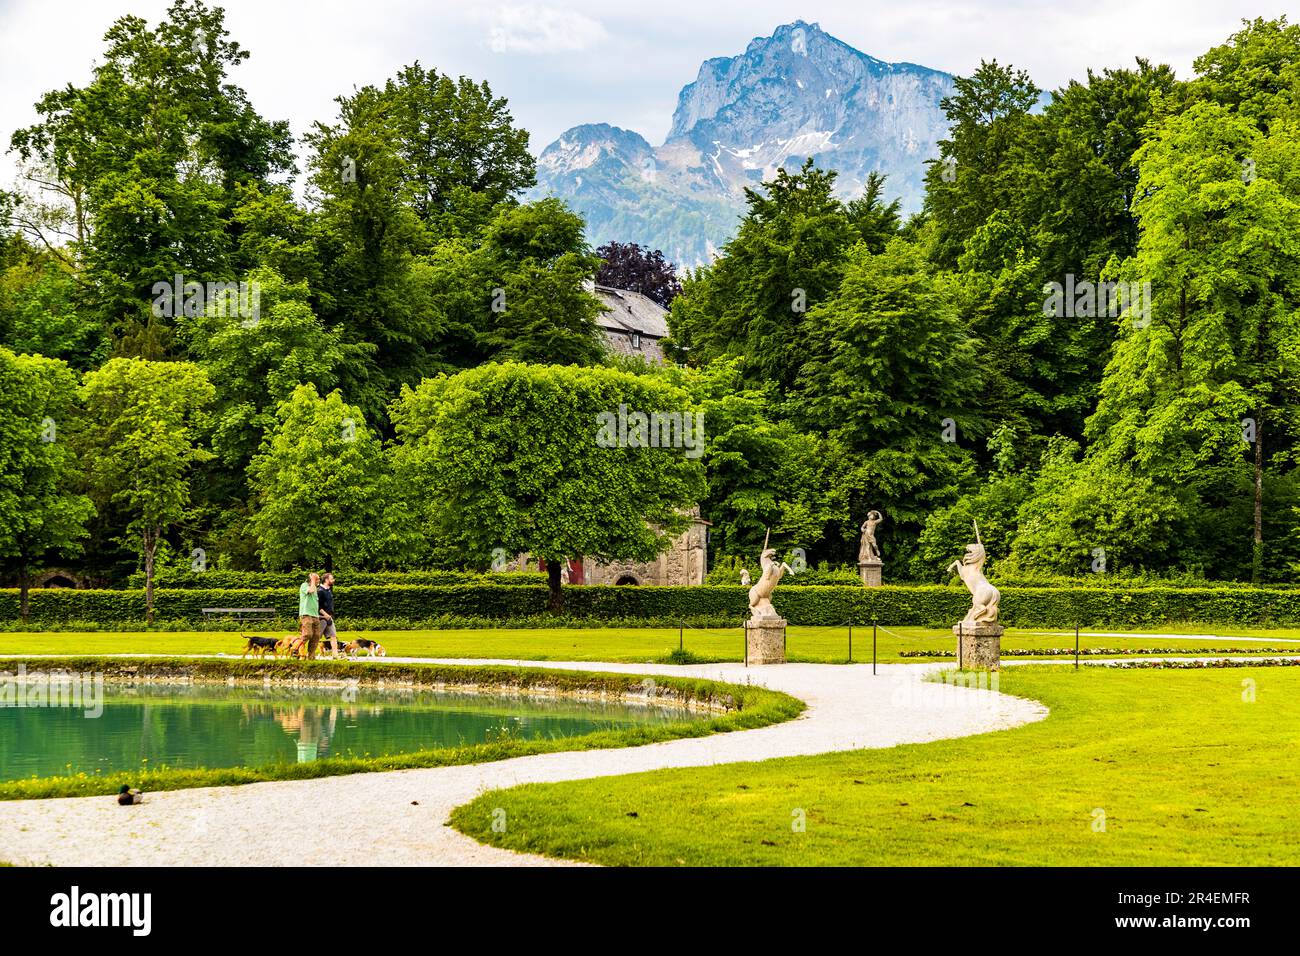 Dogs and unicorn figures at Hellbrunn Palace in Salzburg, Austria Stock Photo